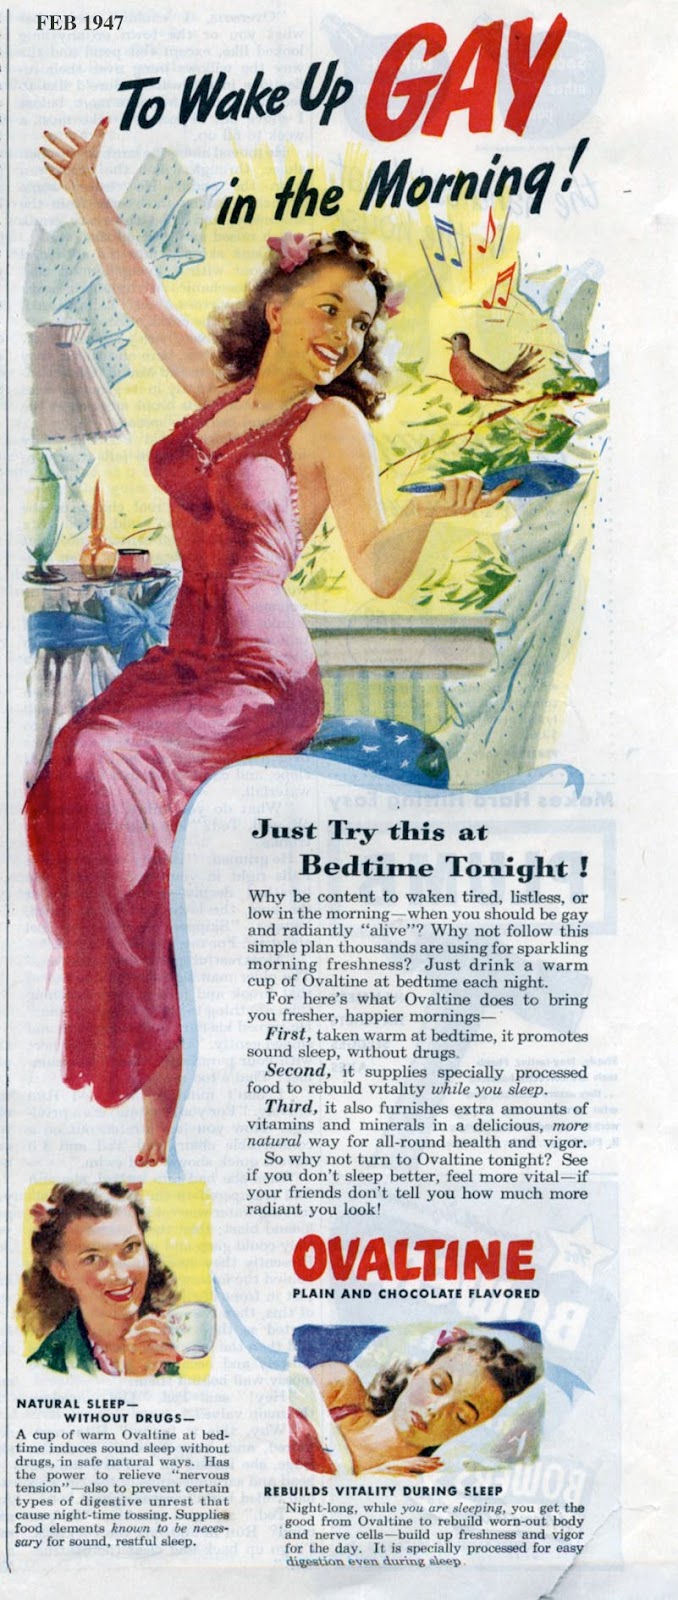 To Wake Up Gay In The Morning Ovaltine February 1947